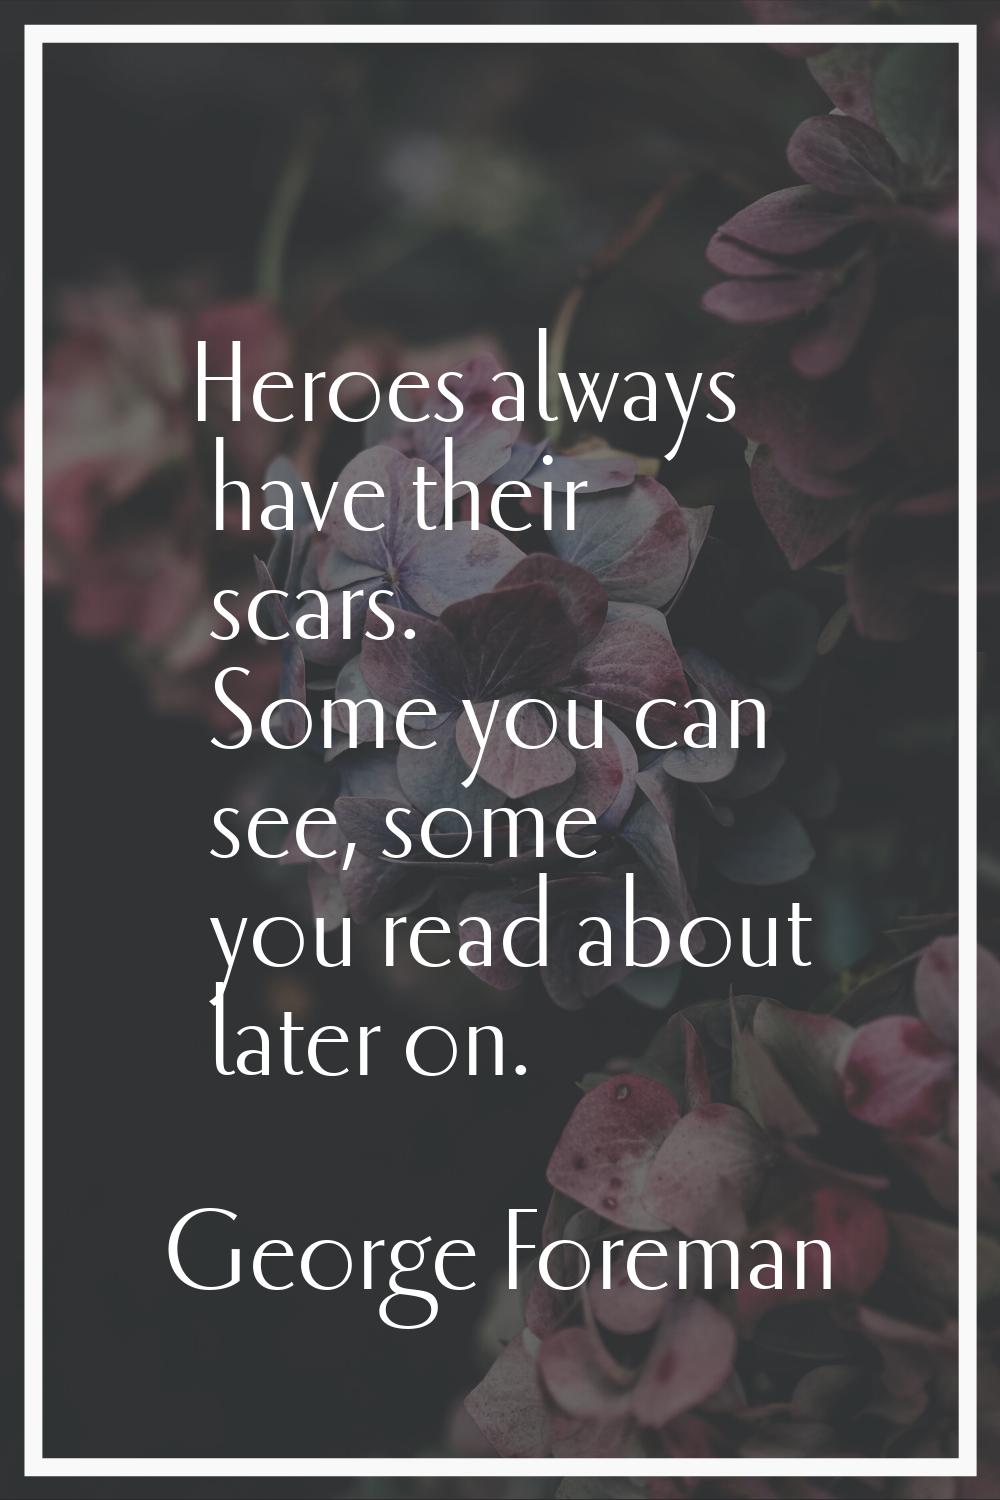 Heroes always have their scars. Some you can see, some you read about later on.